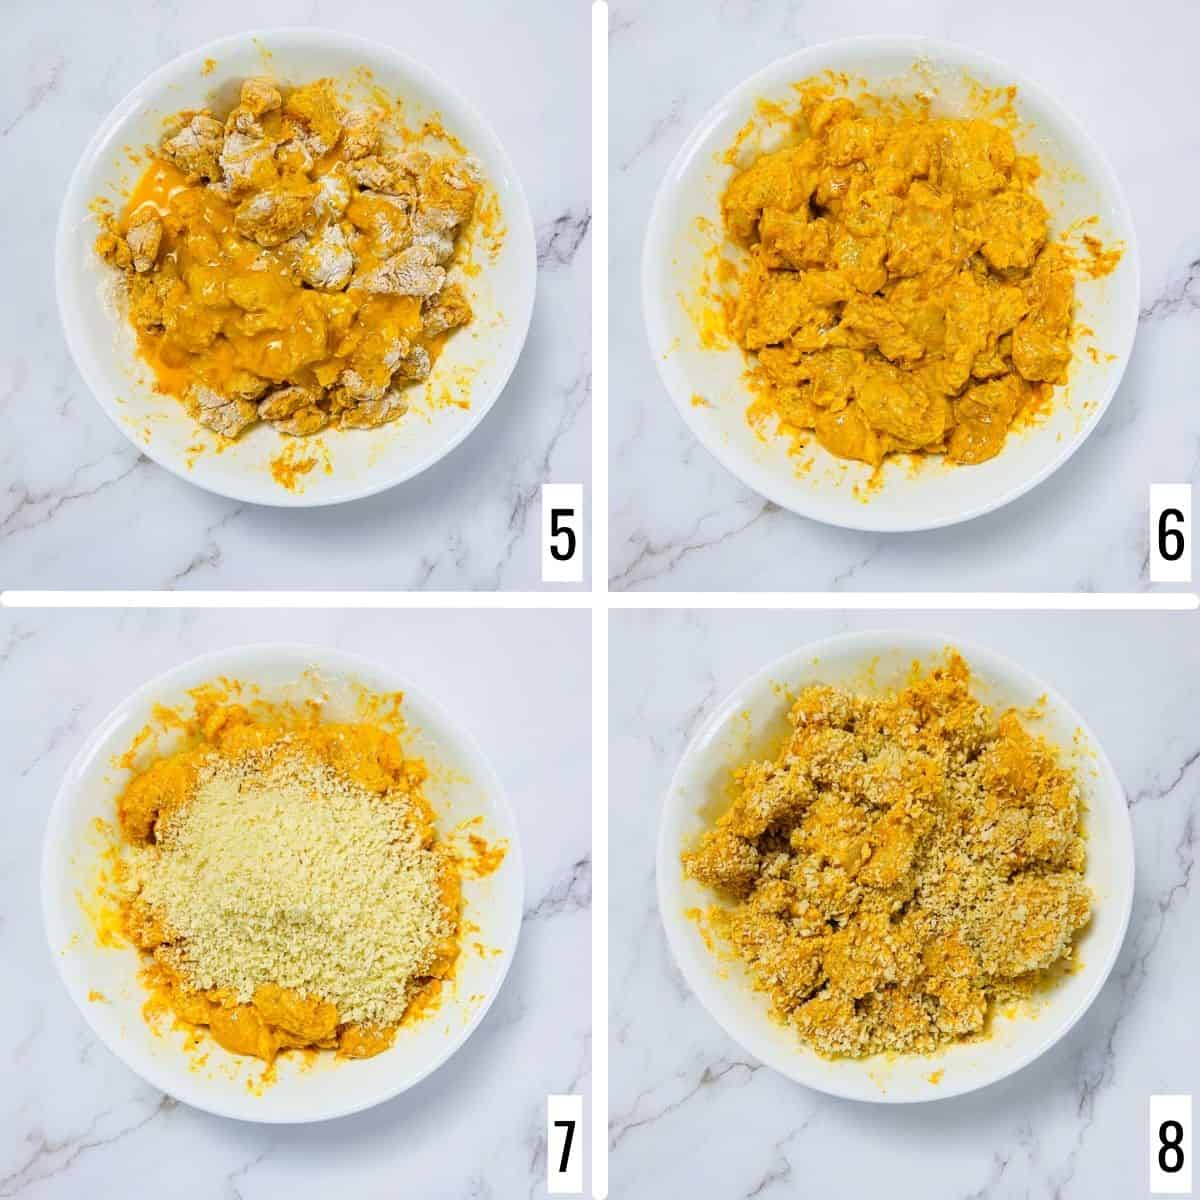 A 4-step collage showing the addition of egg and panko crumbs.